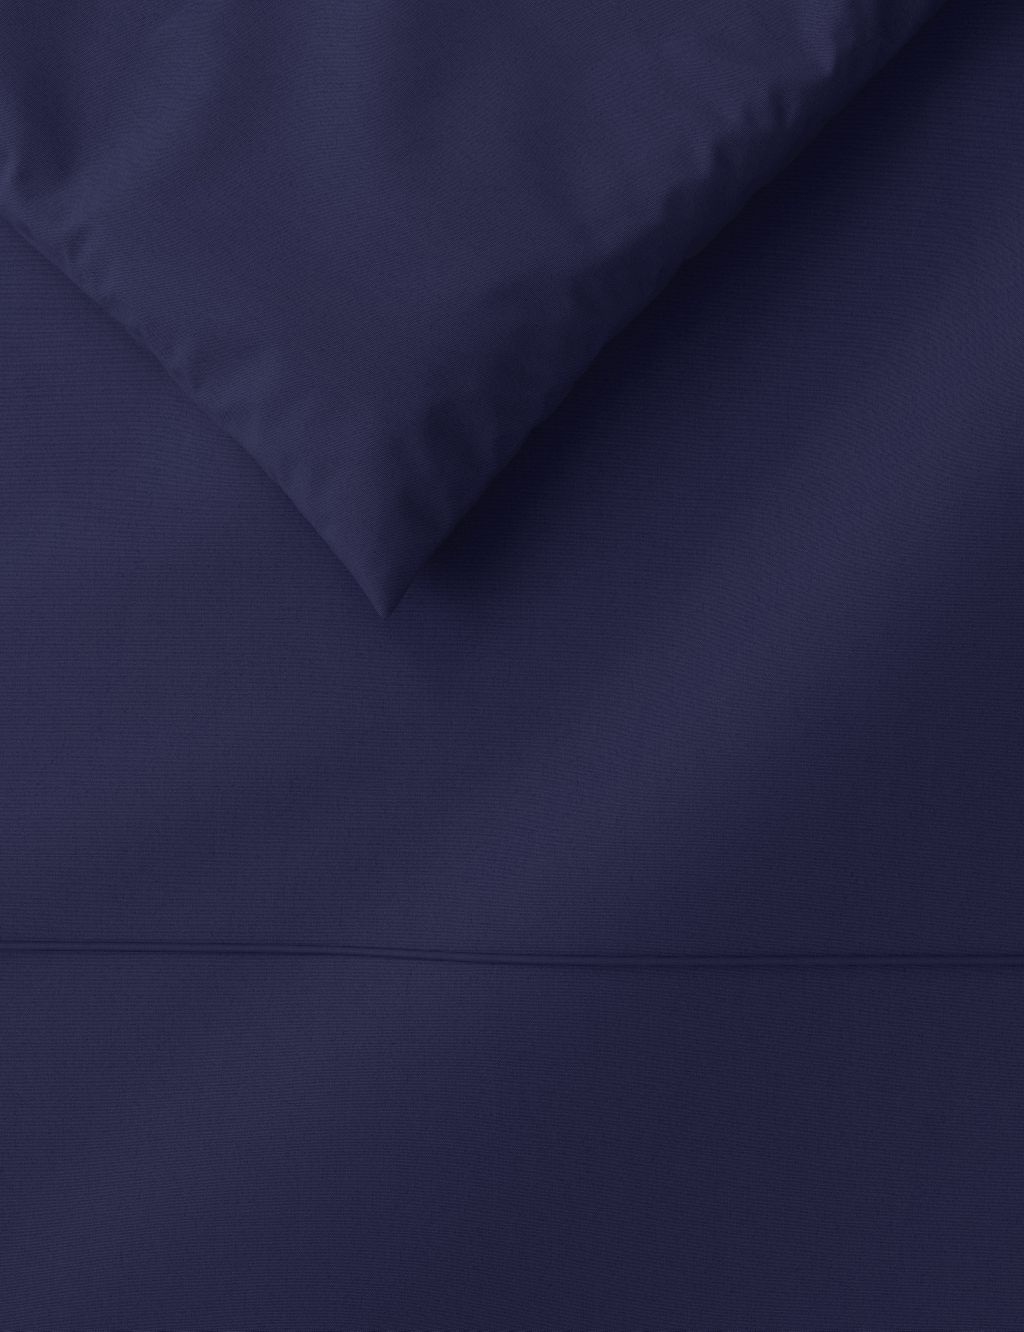 Egyptian Cotton 230 Thread Count Duvet Cover image 2